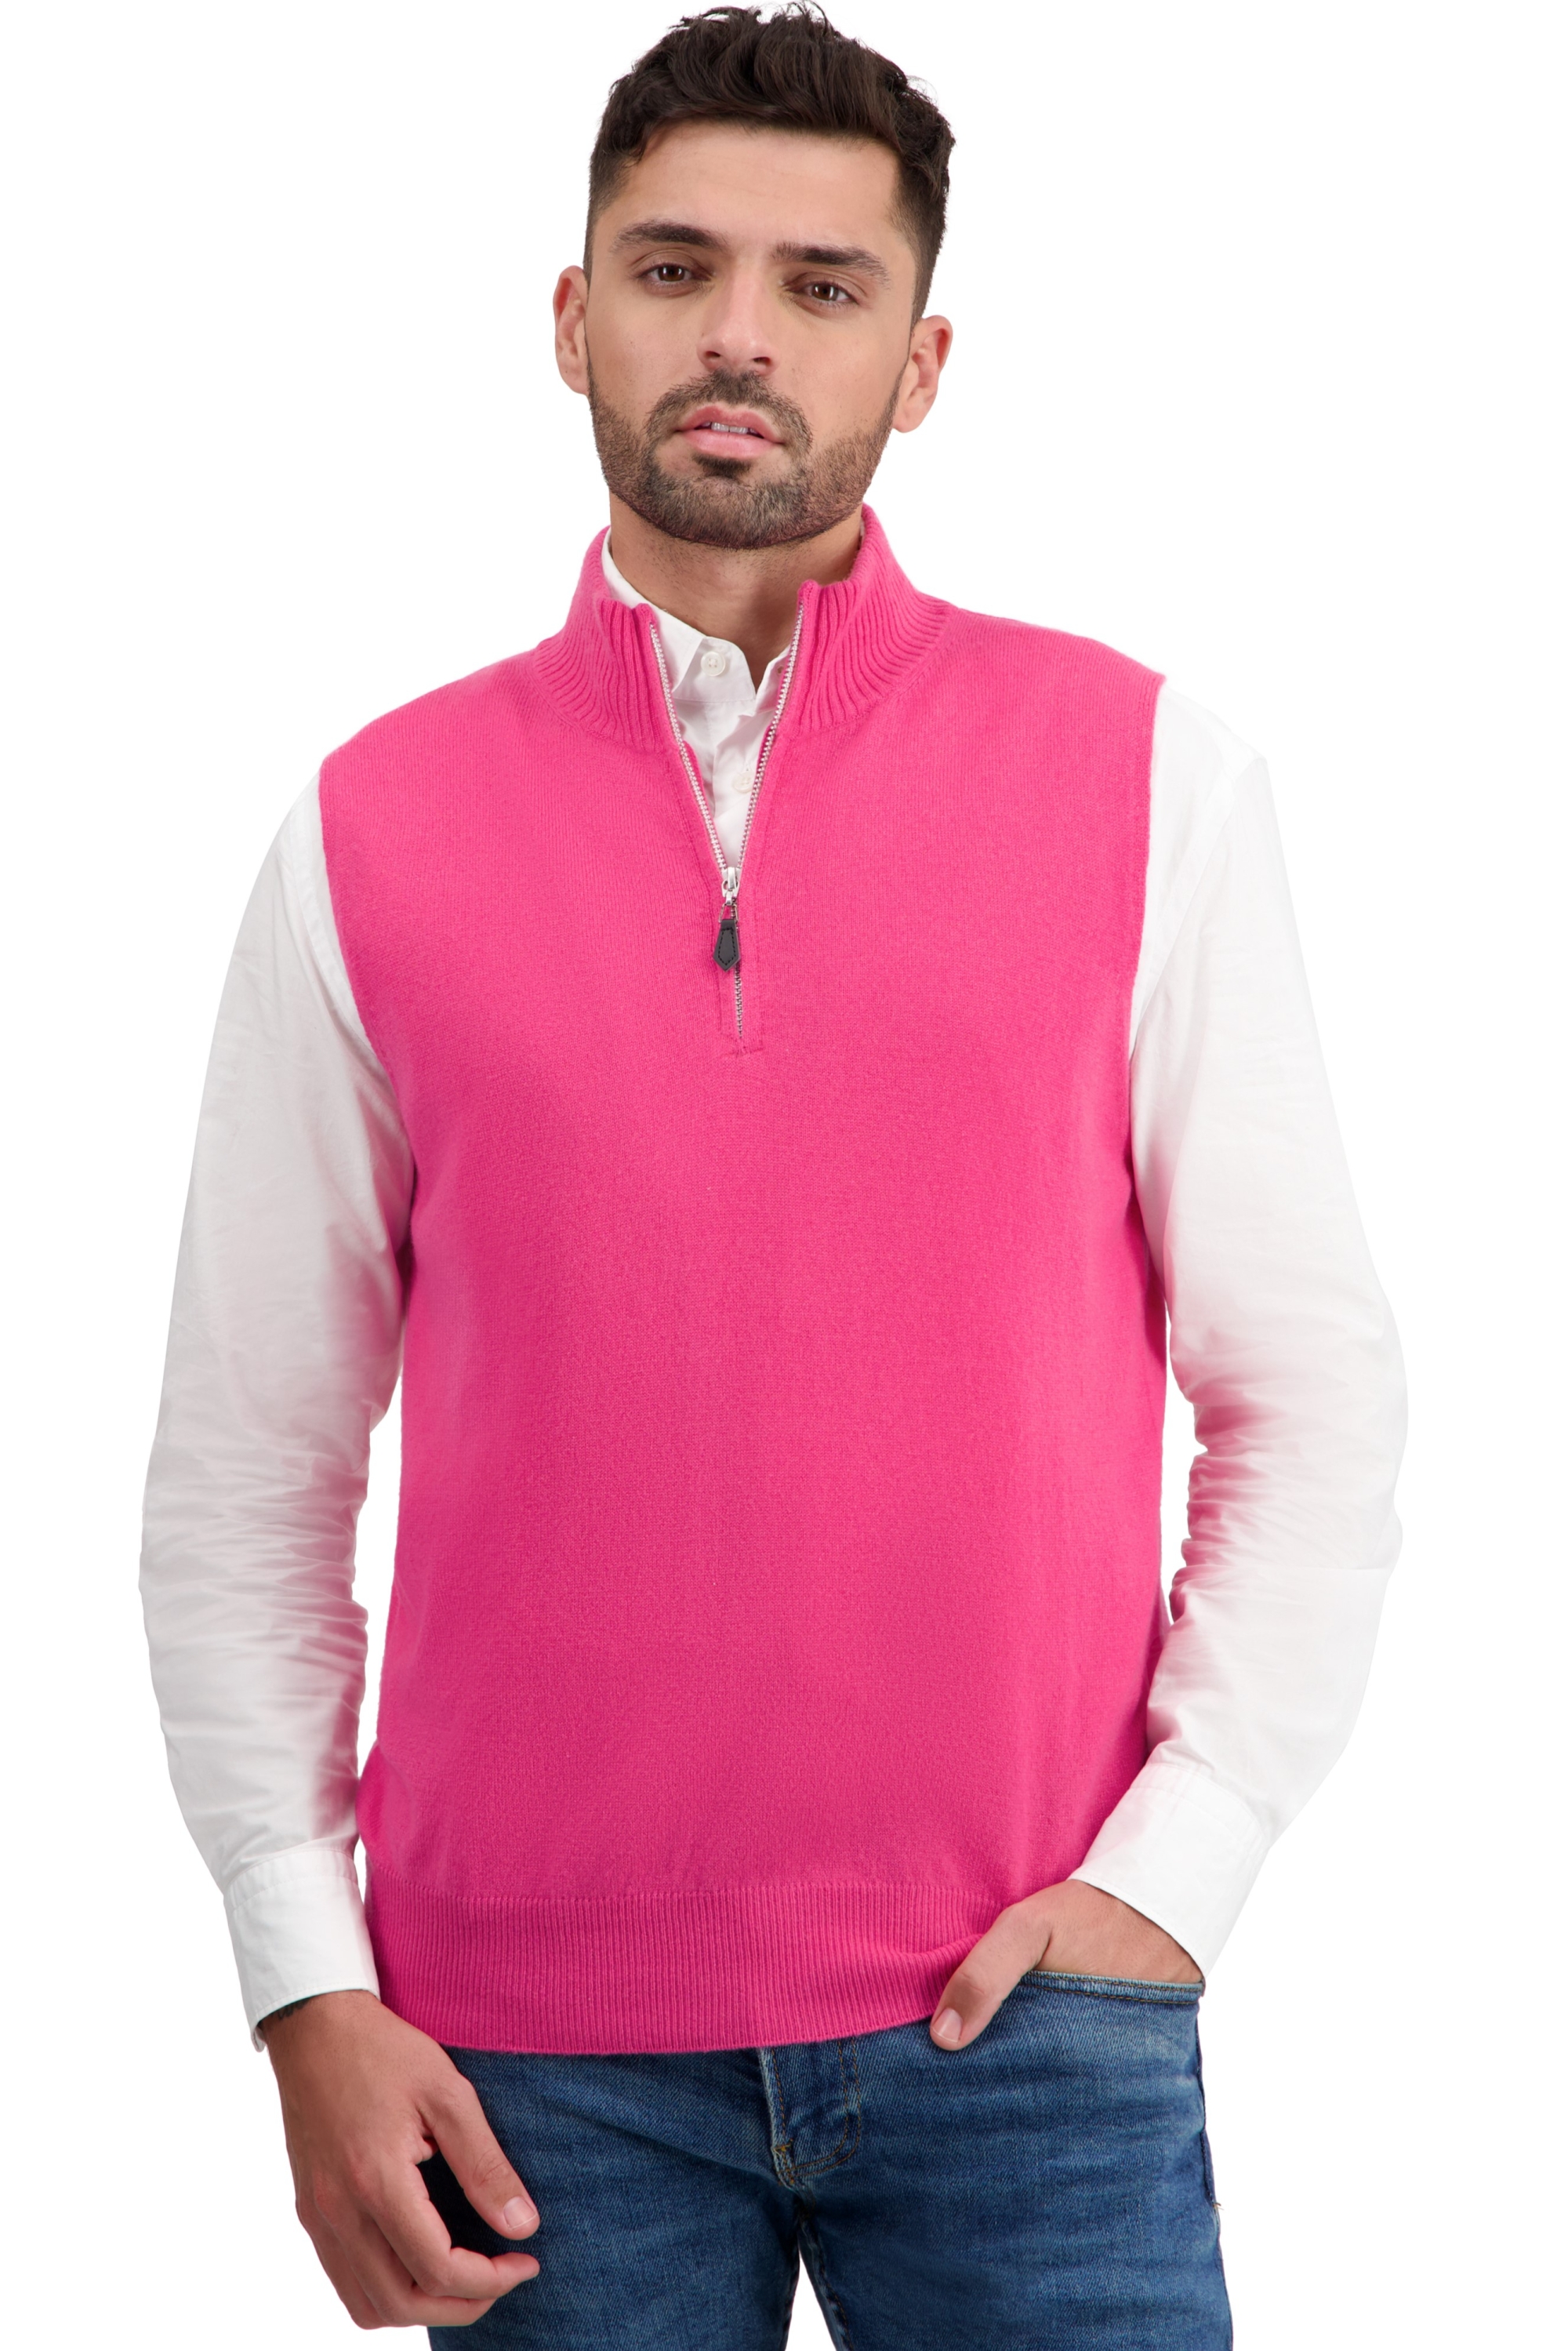 Cashmere men polo style sweaters texas shocking pink xs